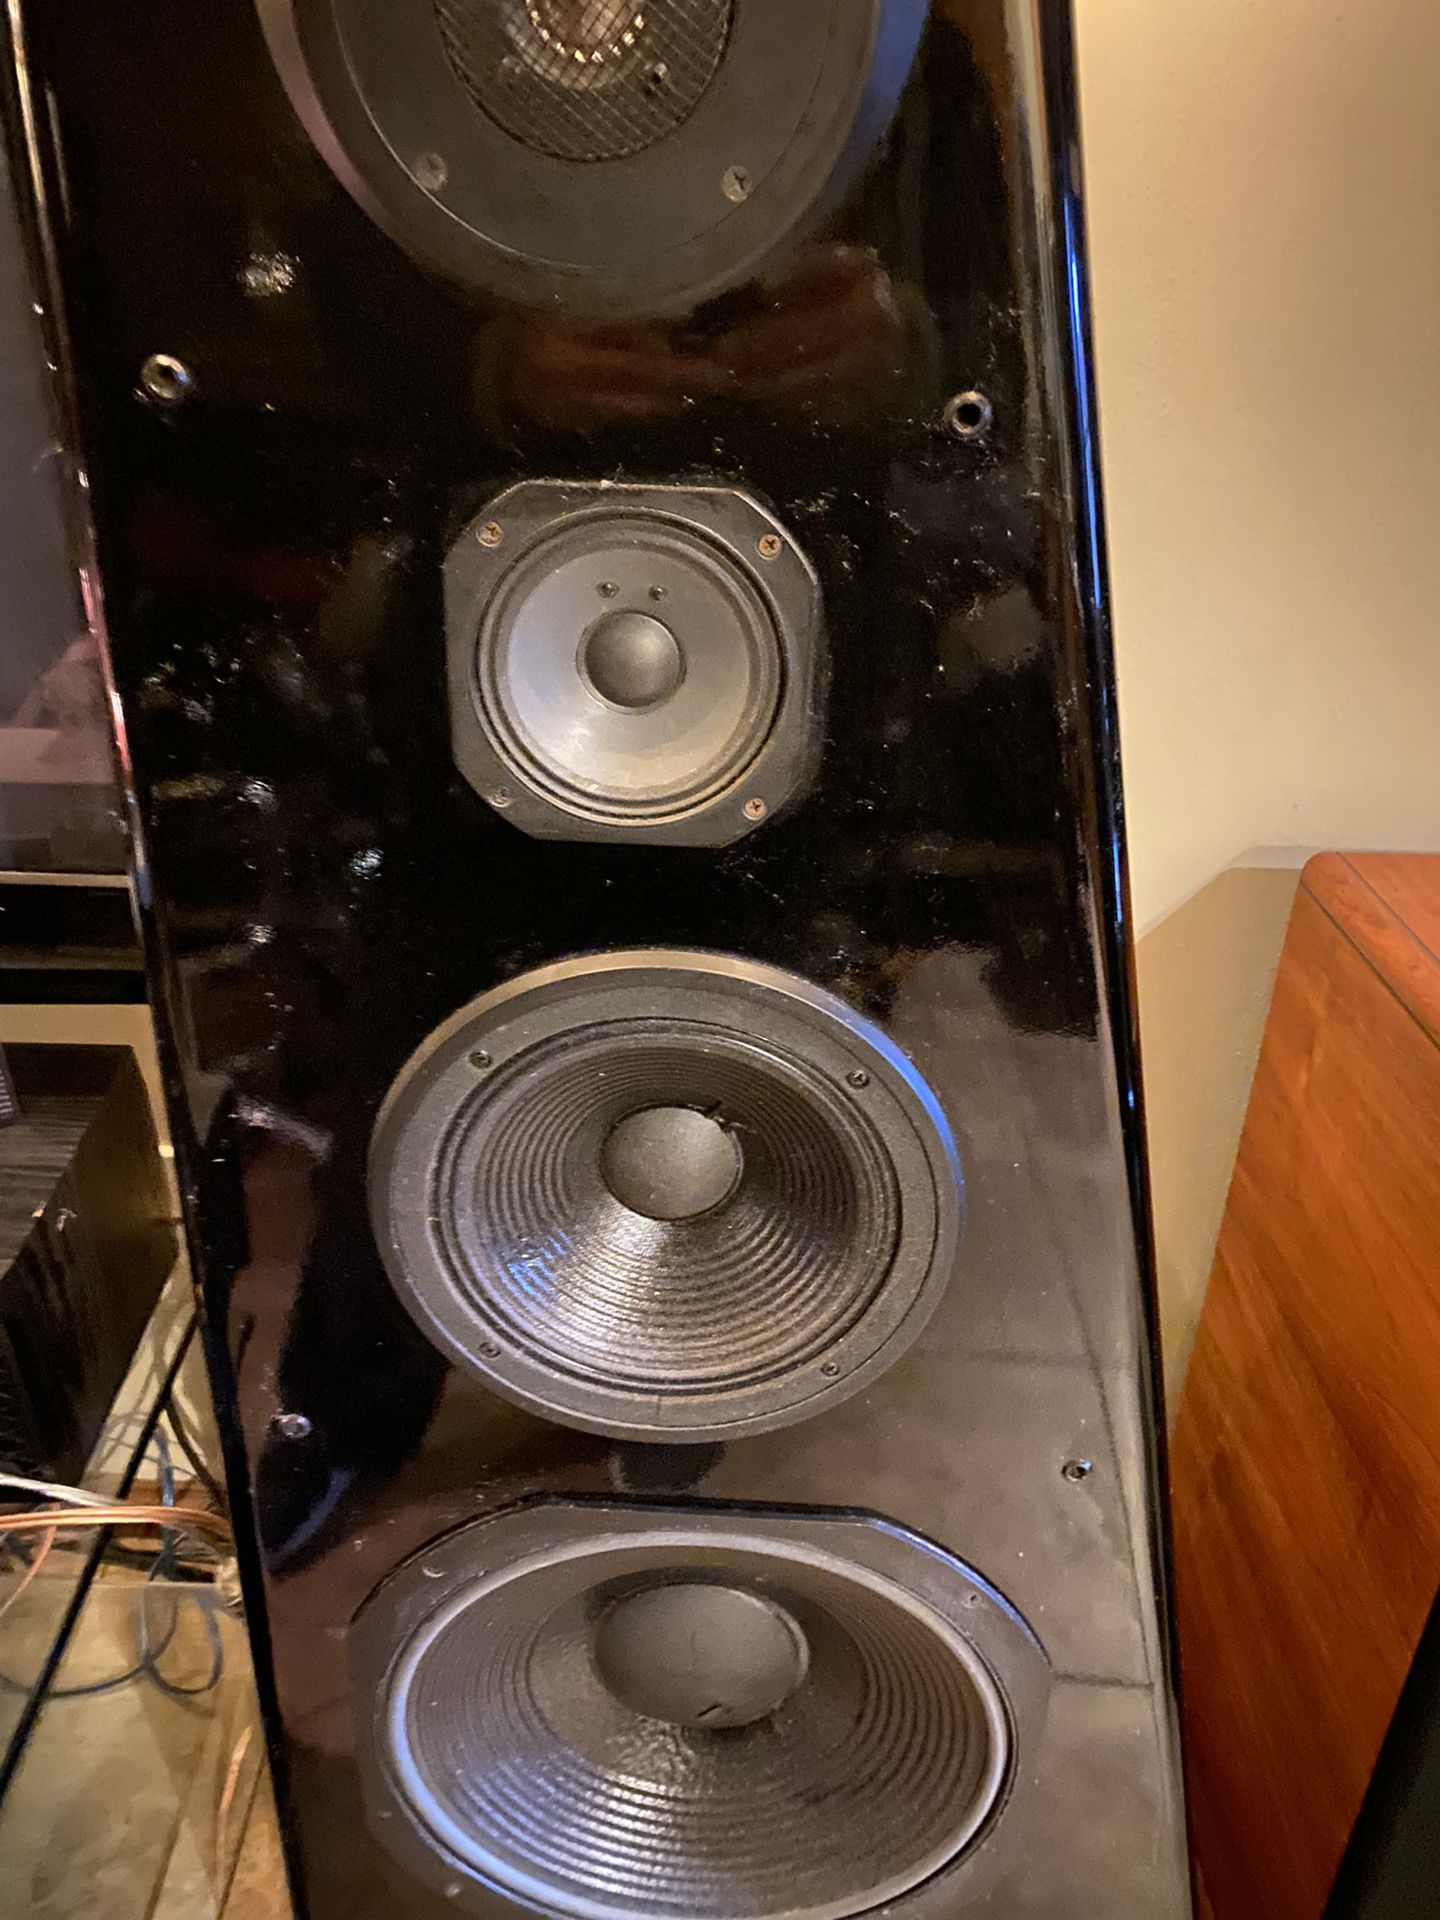 JBL 250 TI four-way design Limited Edition for Sale in La Verne, CA - OfferUp